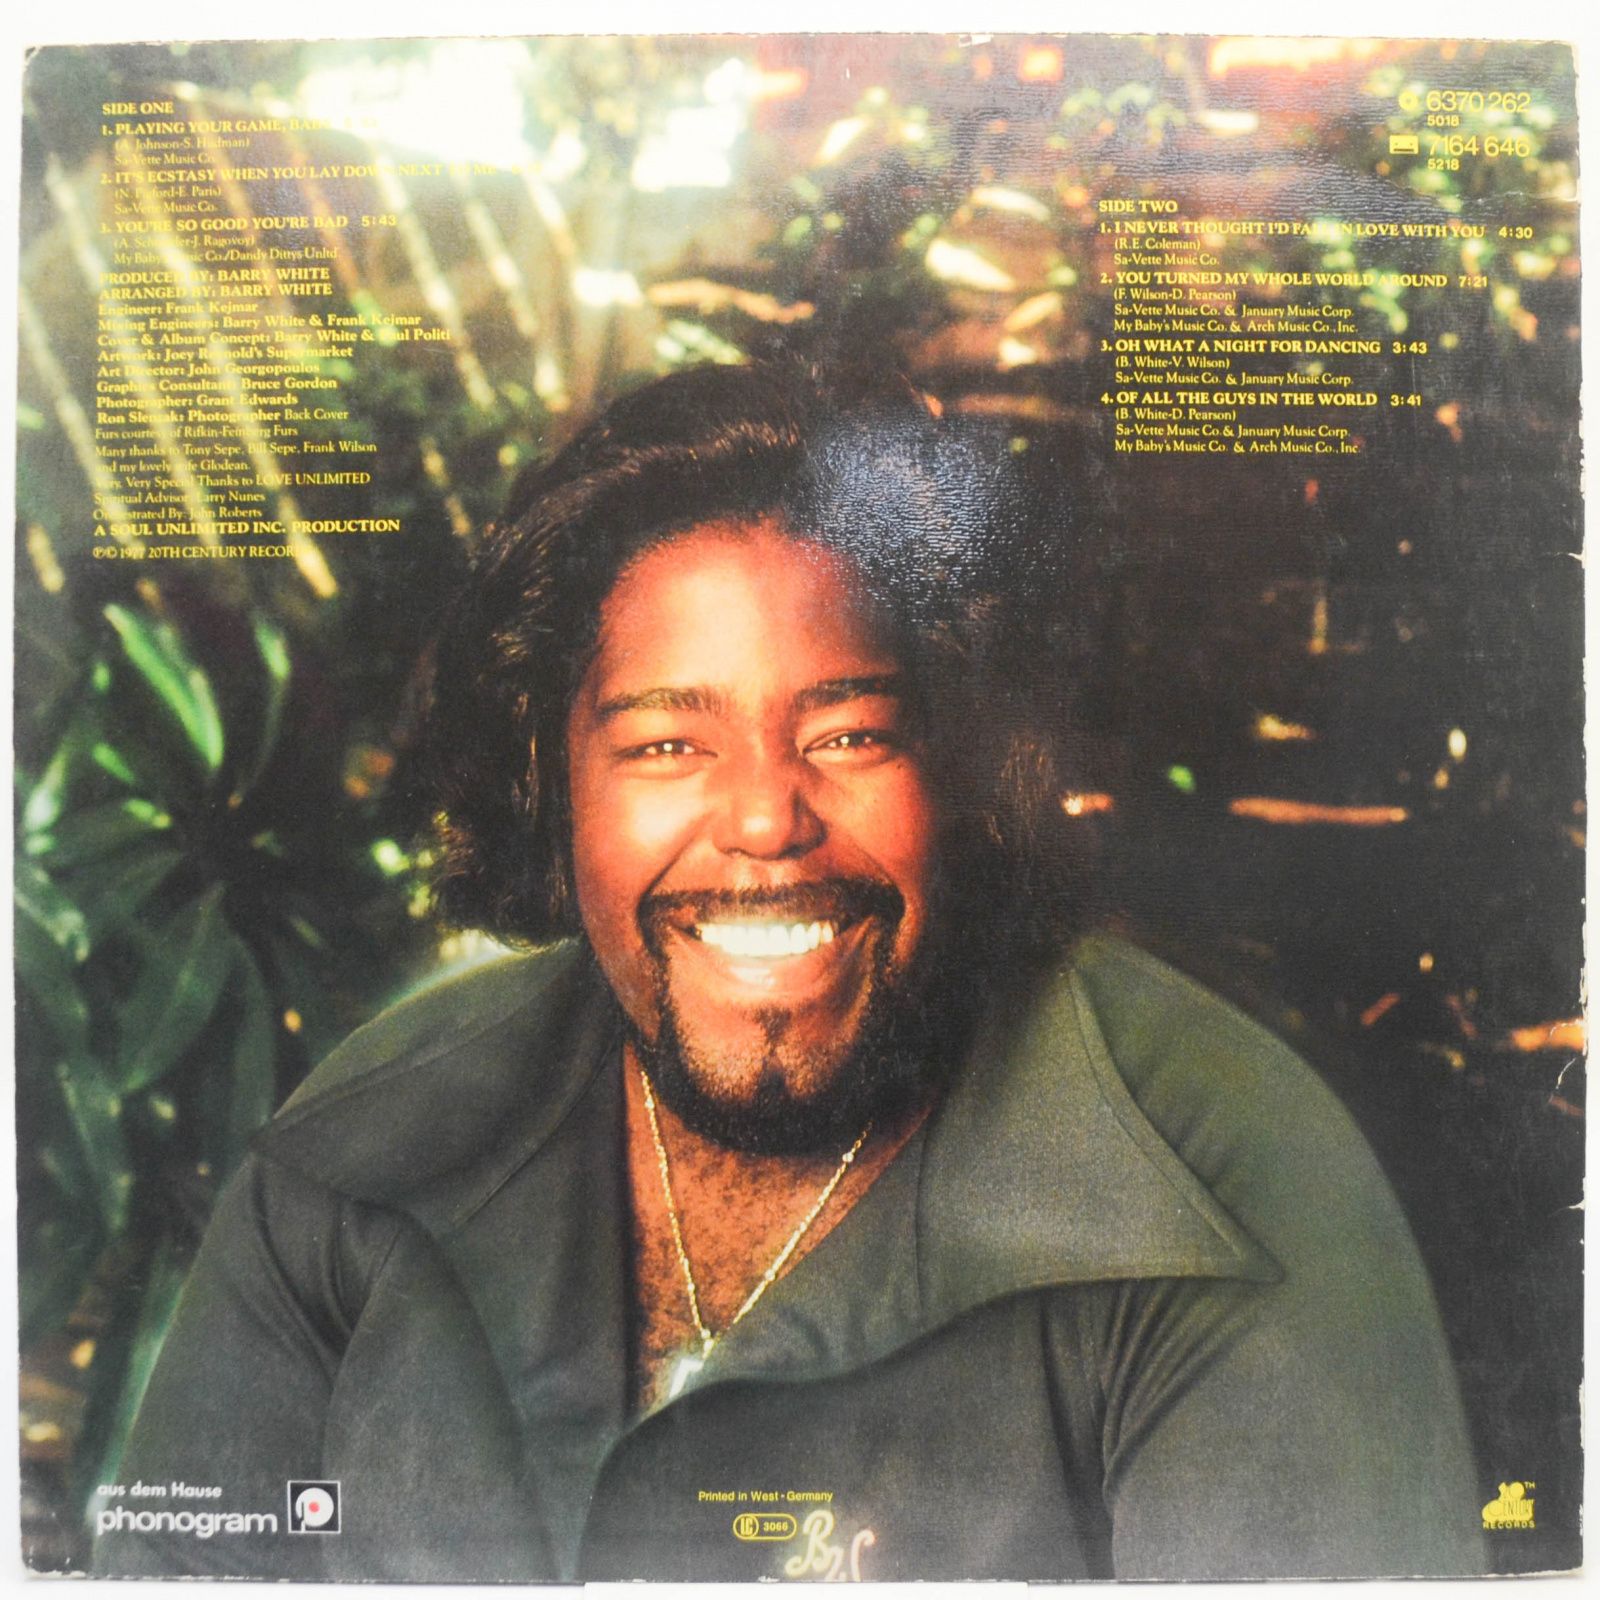 Barry White — Barry White Sings For Someone You Love, 1977